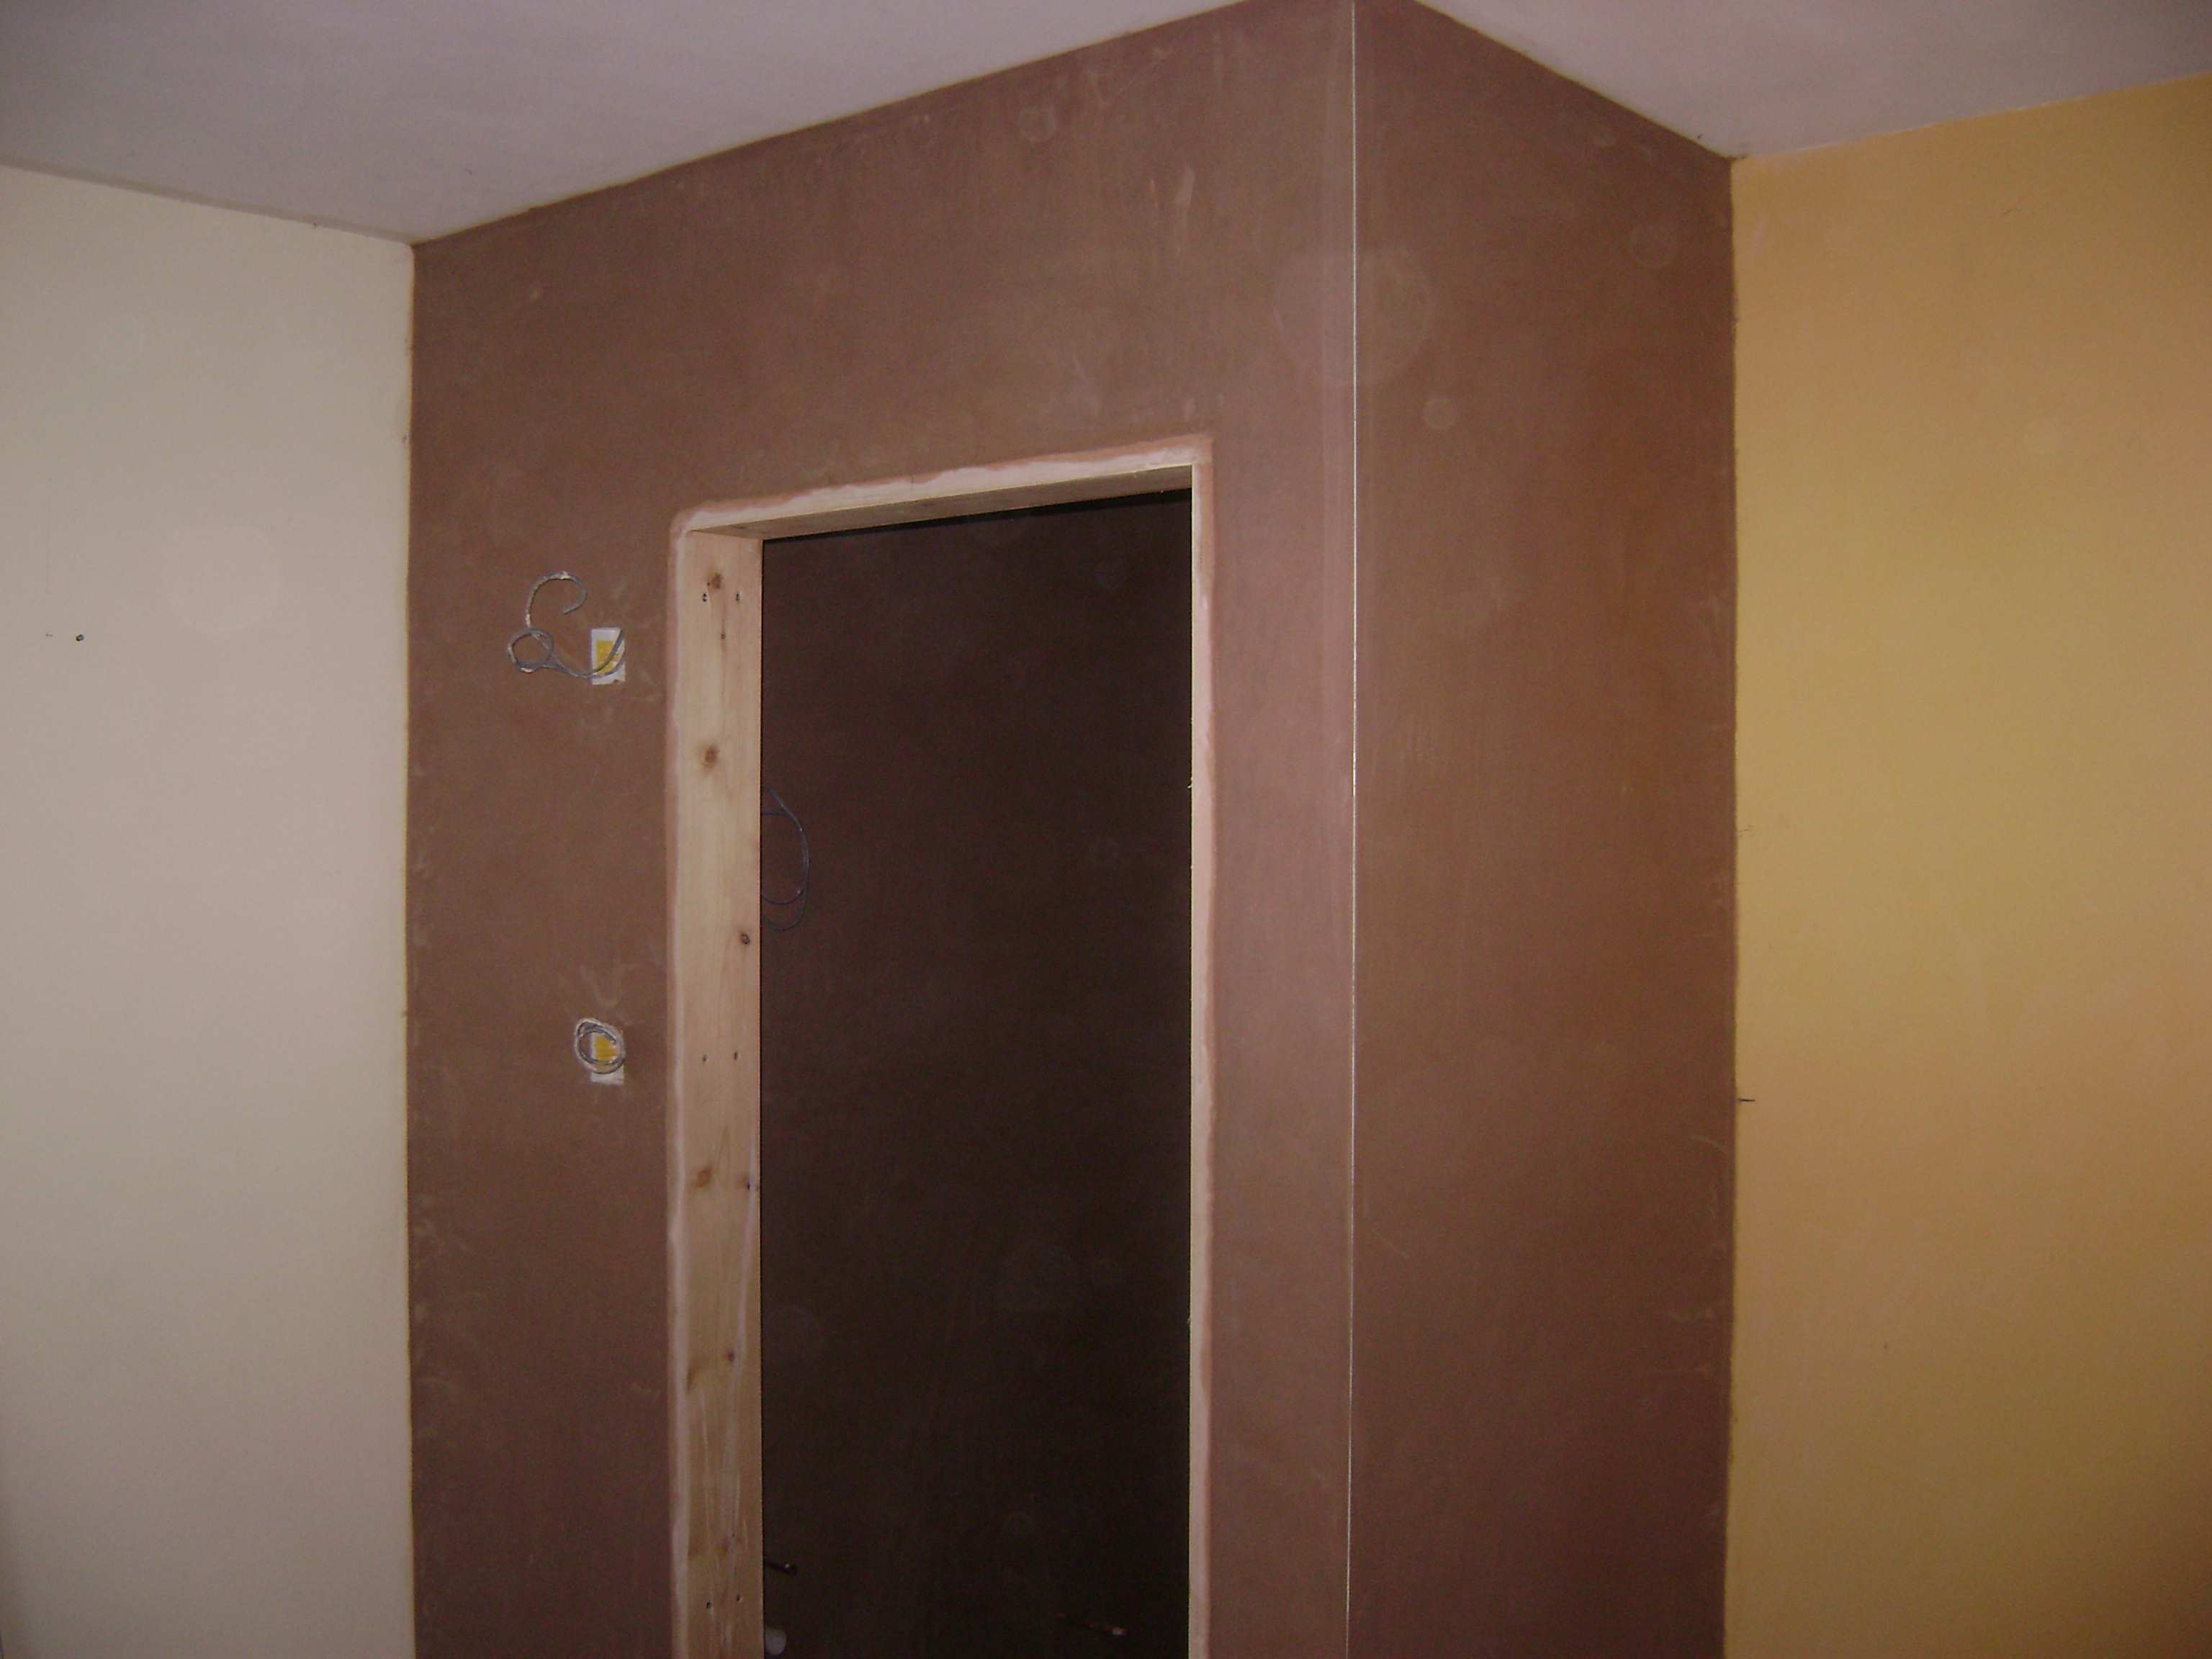 The finished plaster, the customer chose to decorate once the plaster has dried